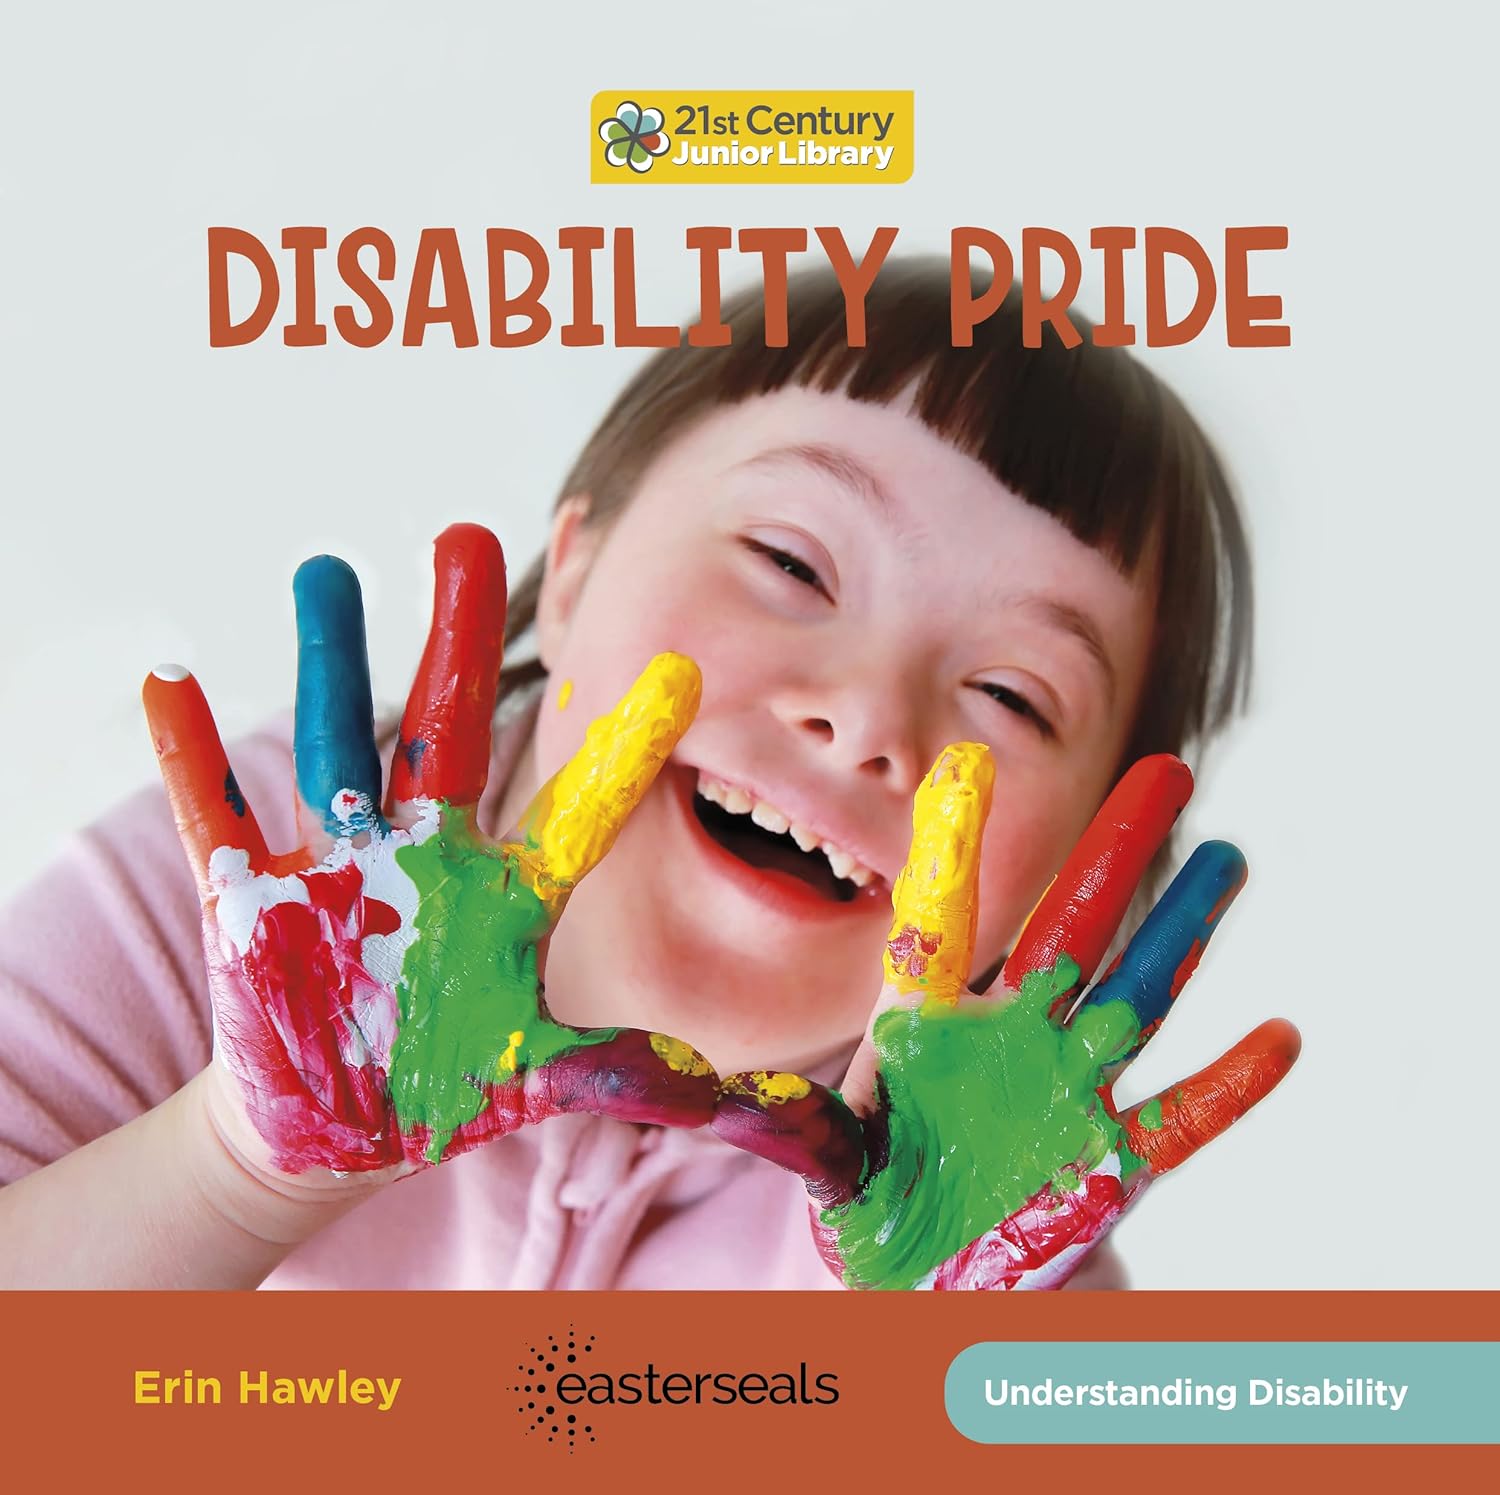 Image for "Disability Pride"